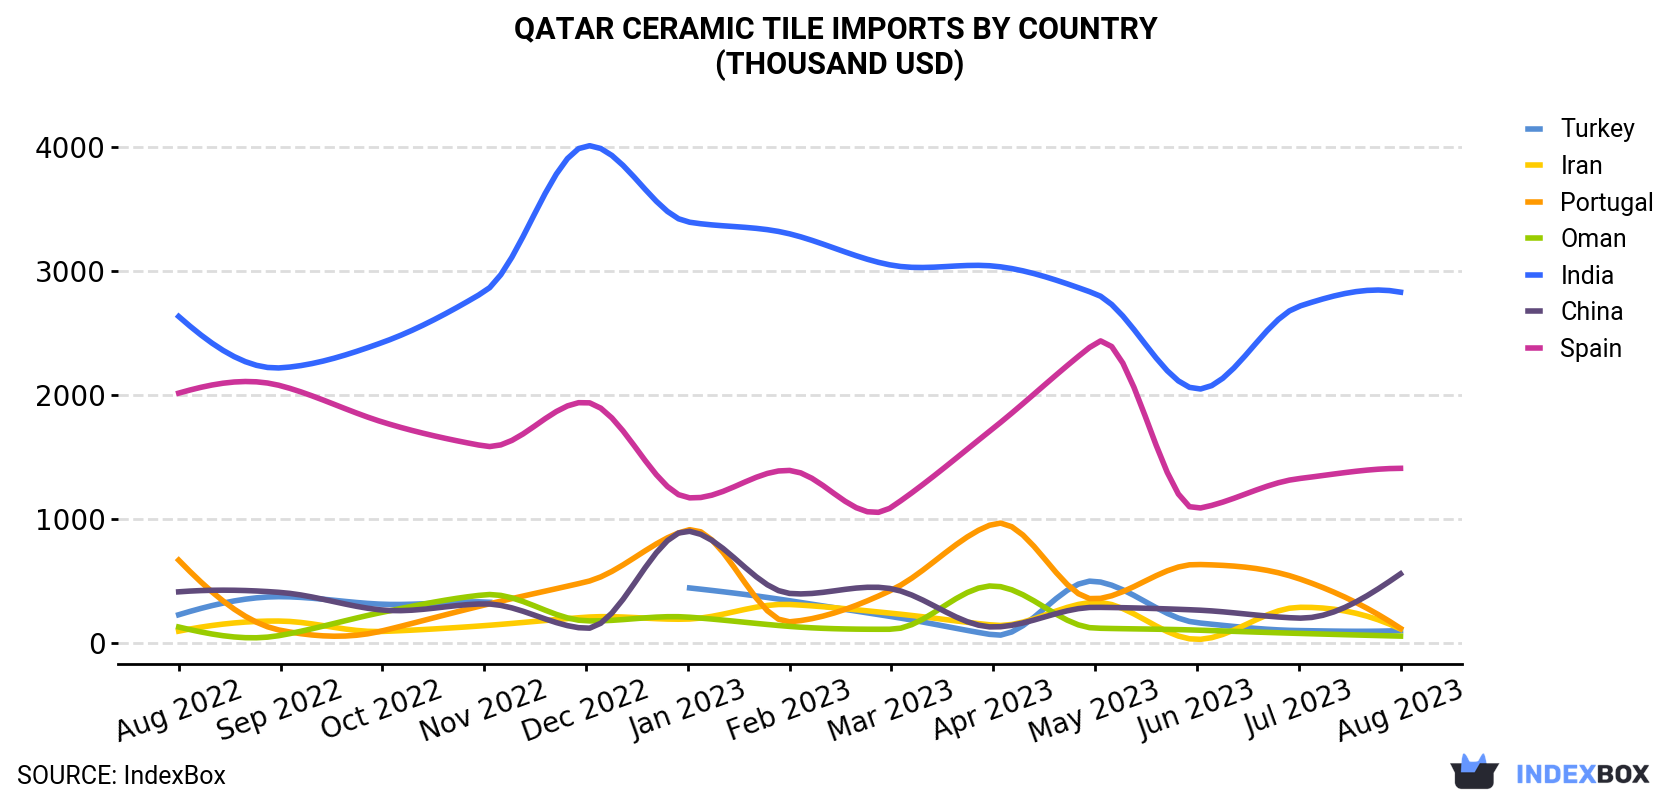 Qatar Ceramic Tile Imports By Country (Thousand USD)